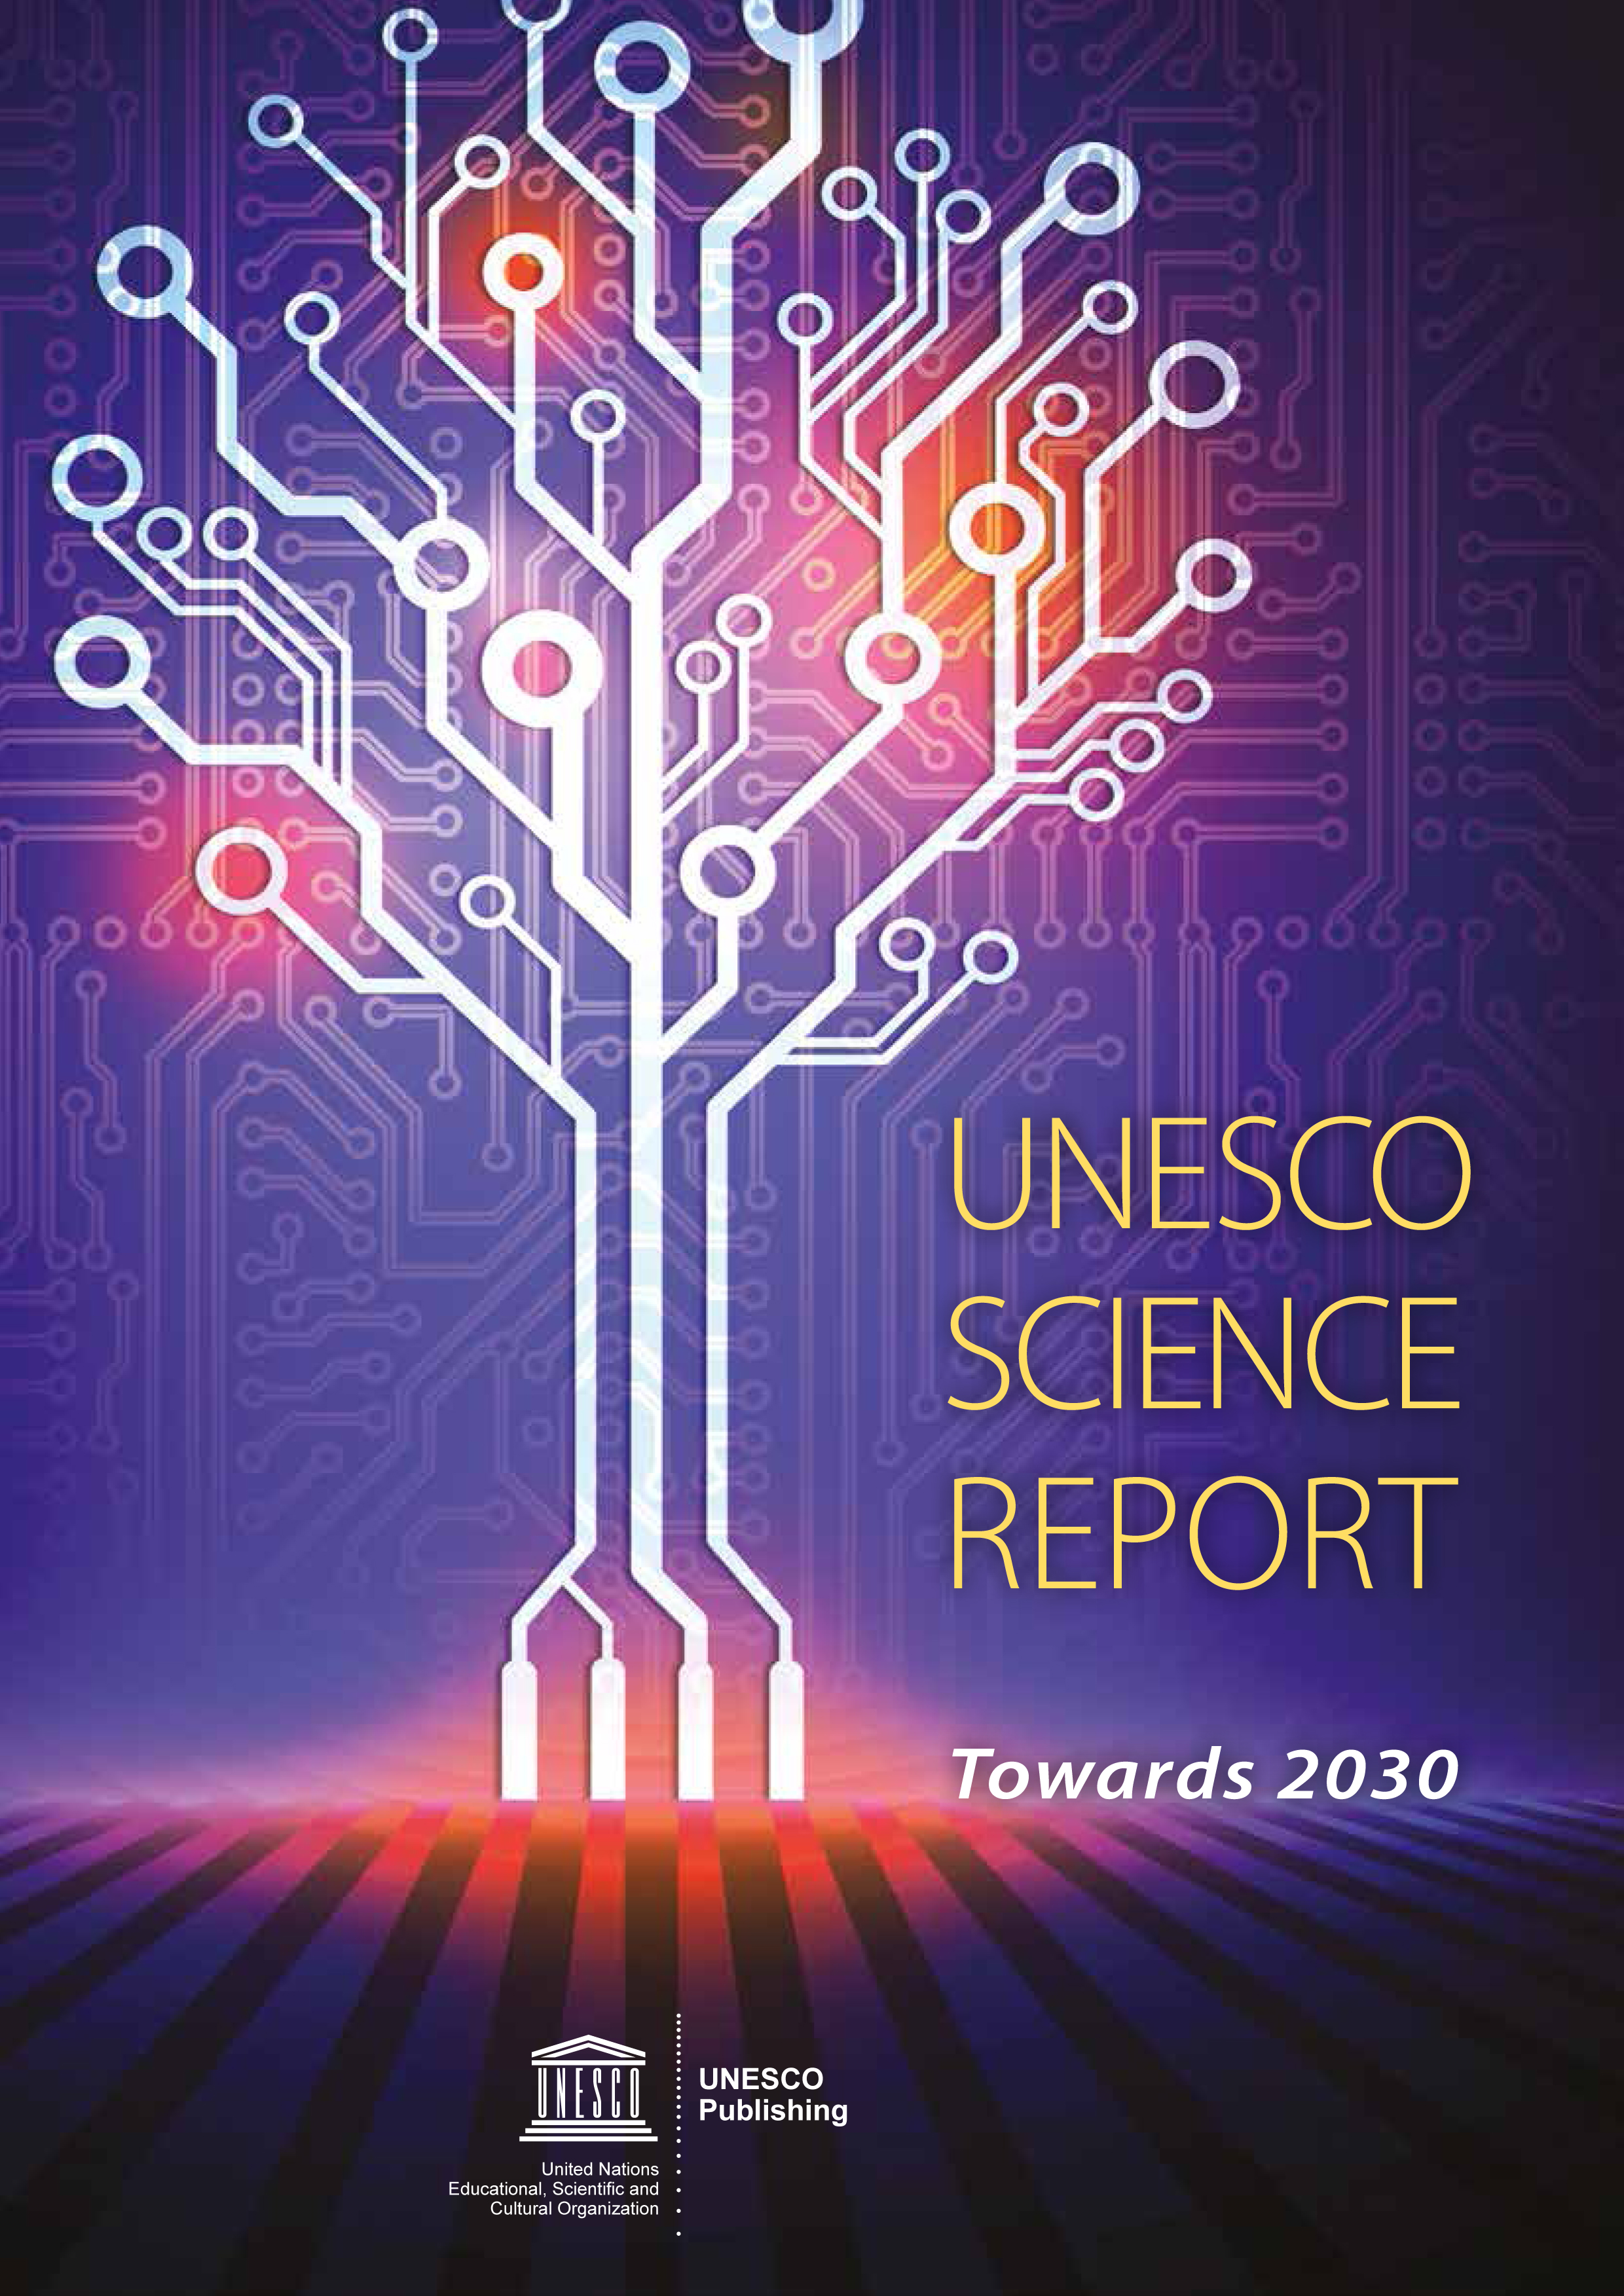 image of Science will play a key role in realizing Agenda 2030